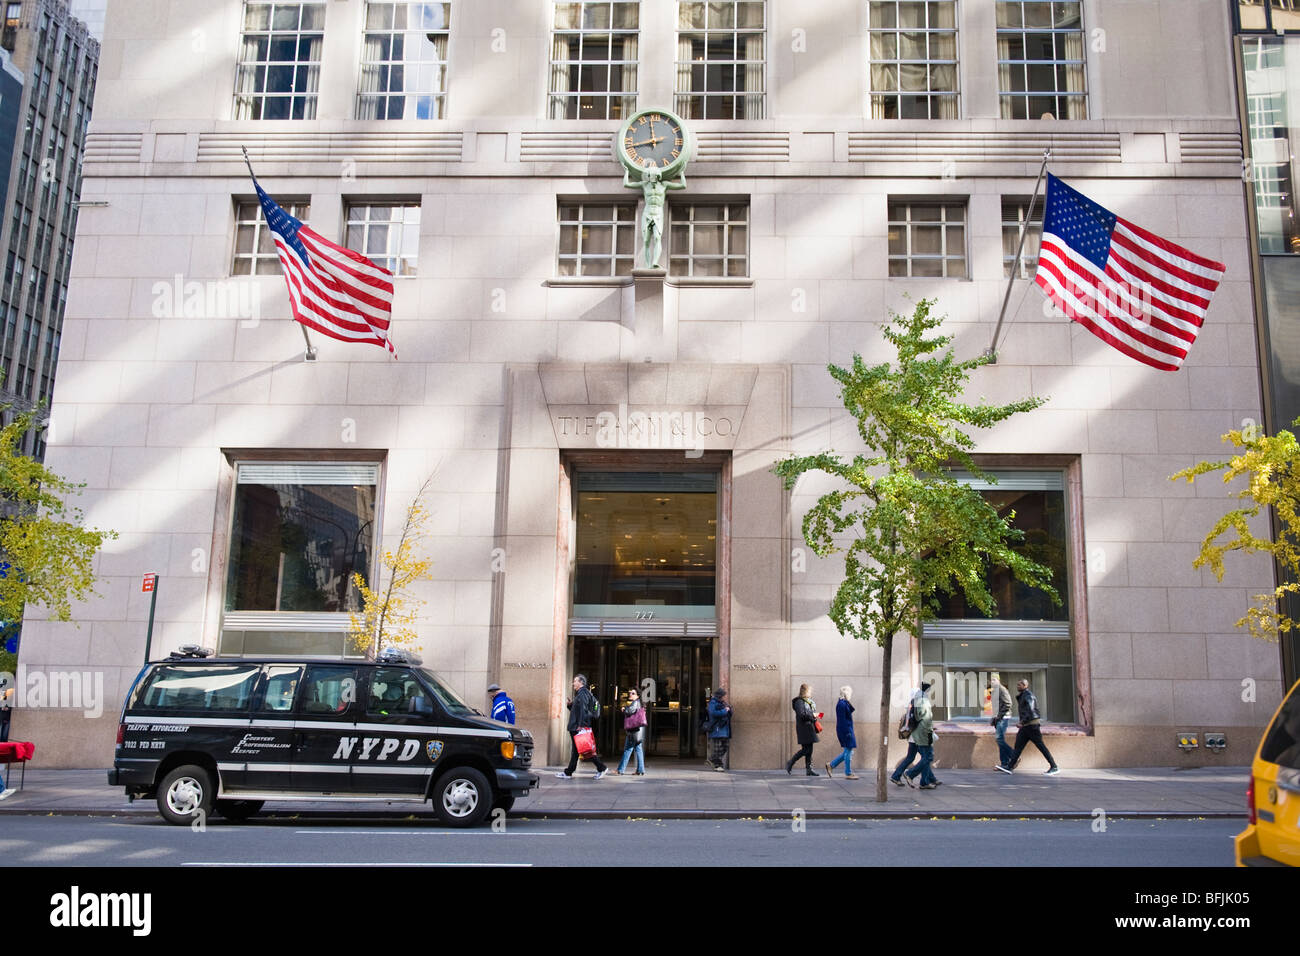 New York City , The Big Apple , The Tiffany & Co store or shop on 5th Avenue with American flags & NYPD traffic vehicle outside Stock Photo